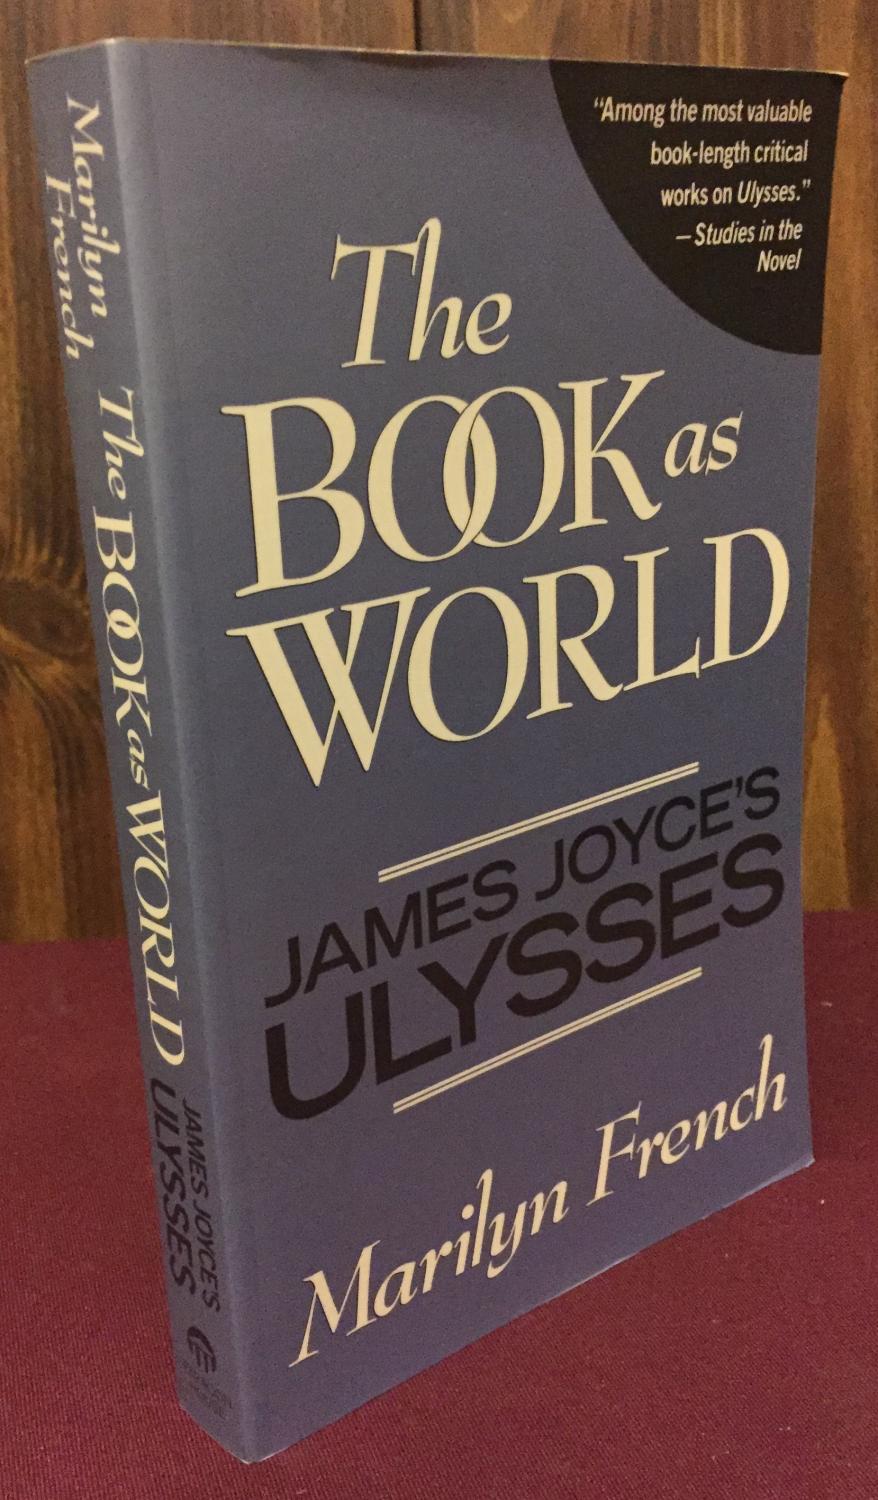 Book as World: James Joyce's Ulysses - Marilyn French